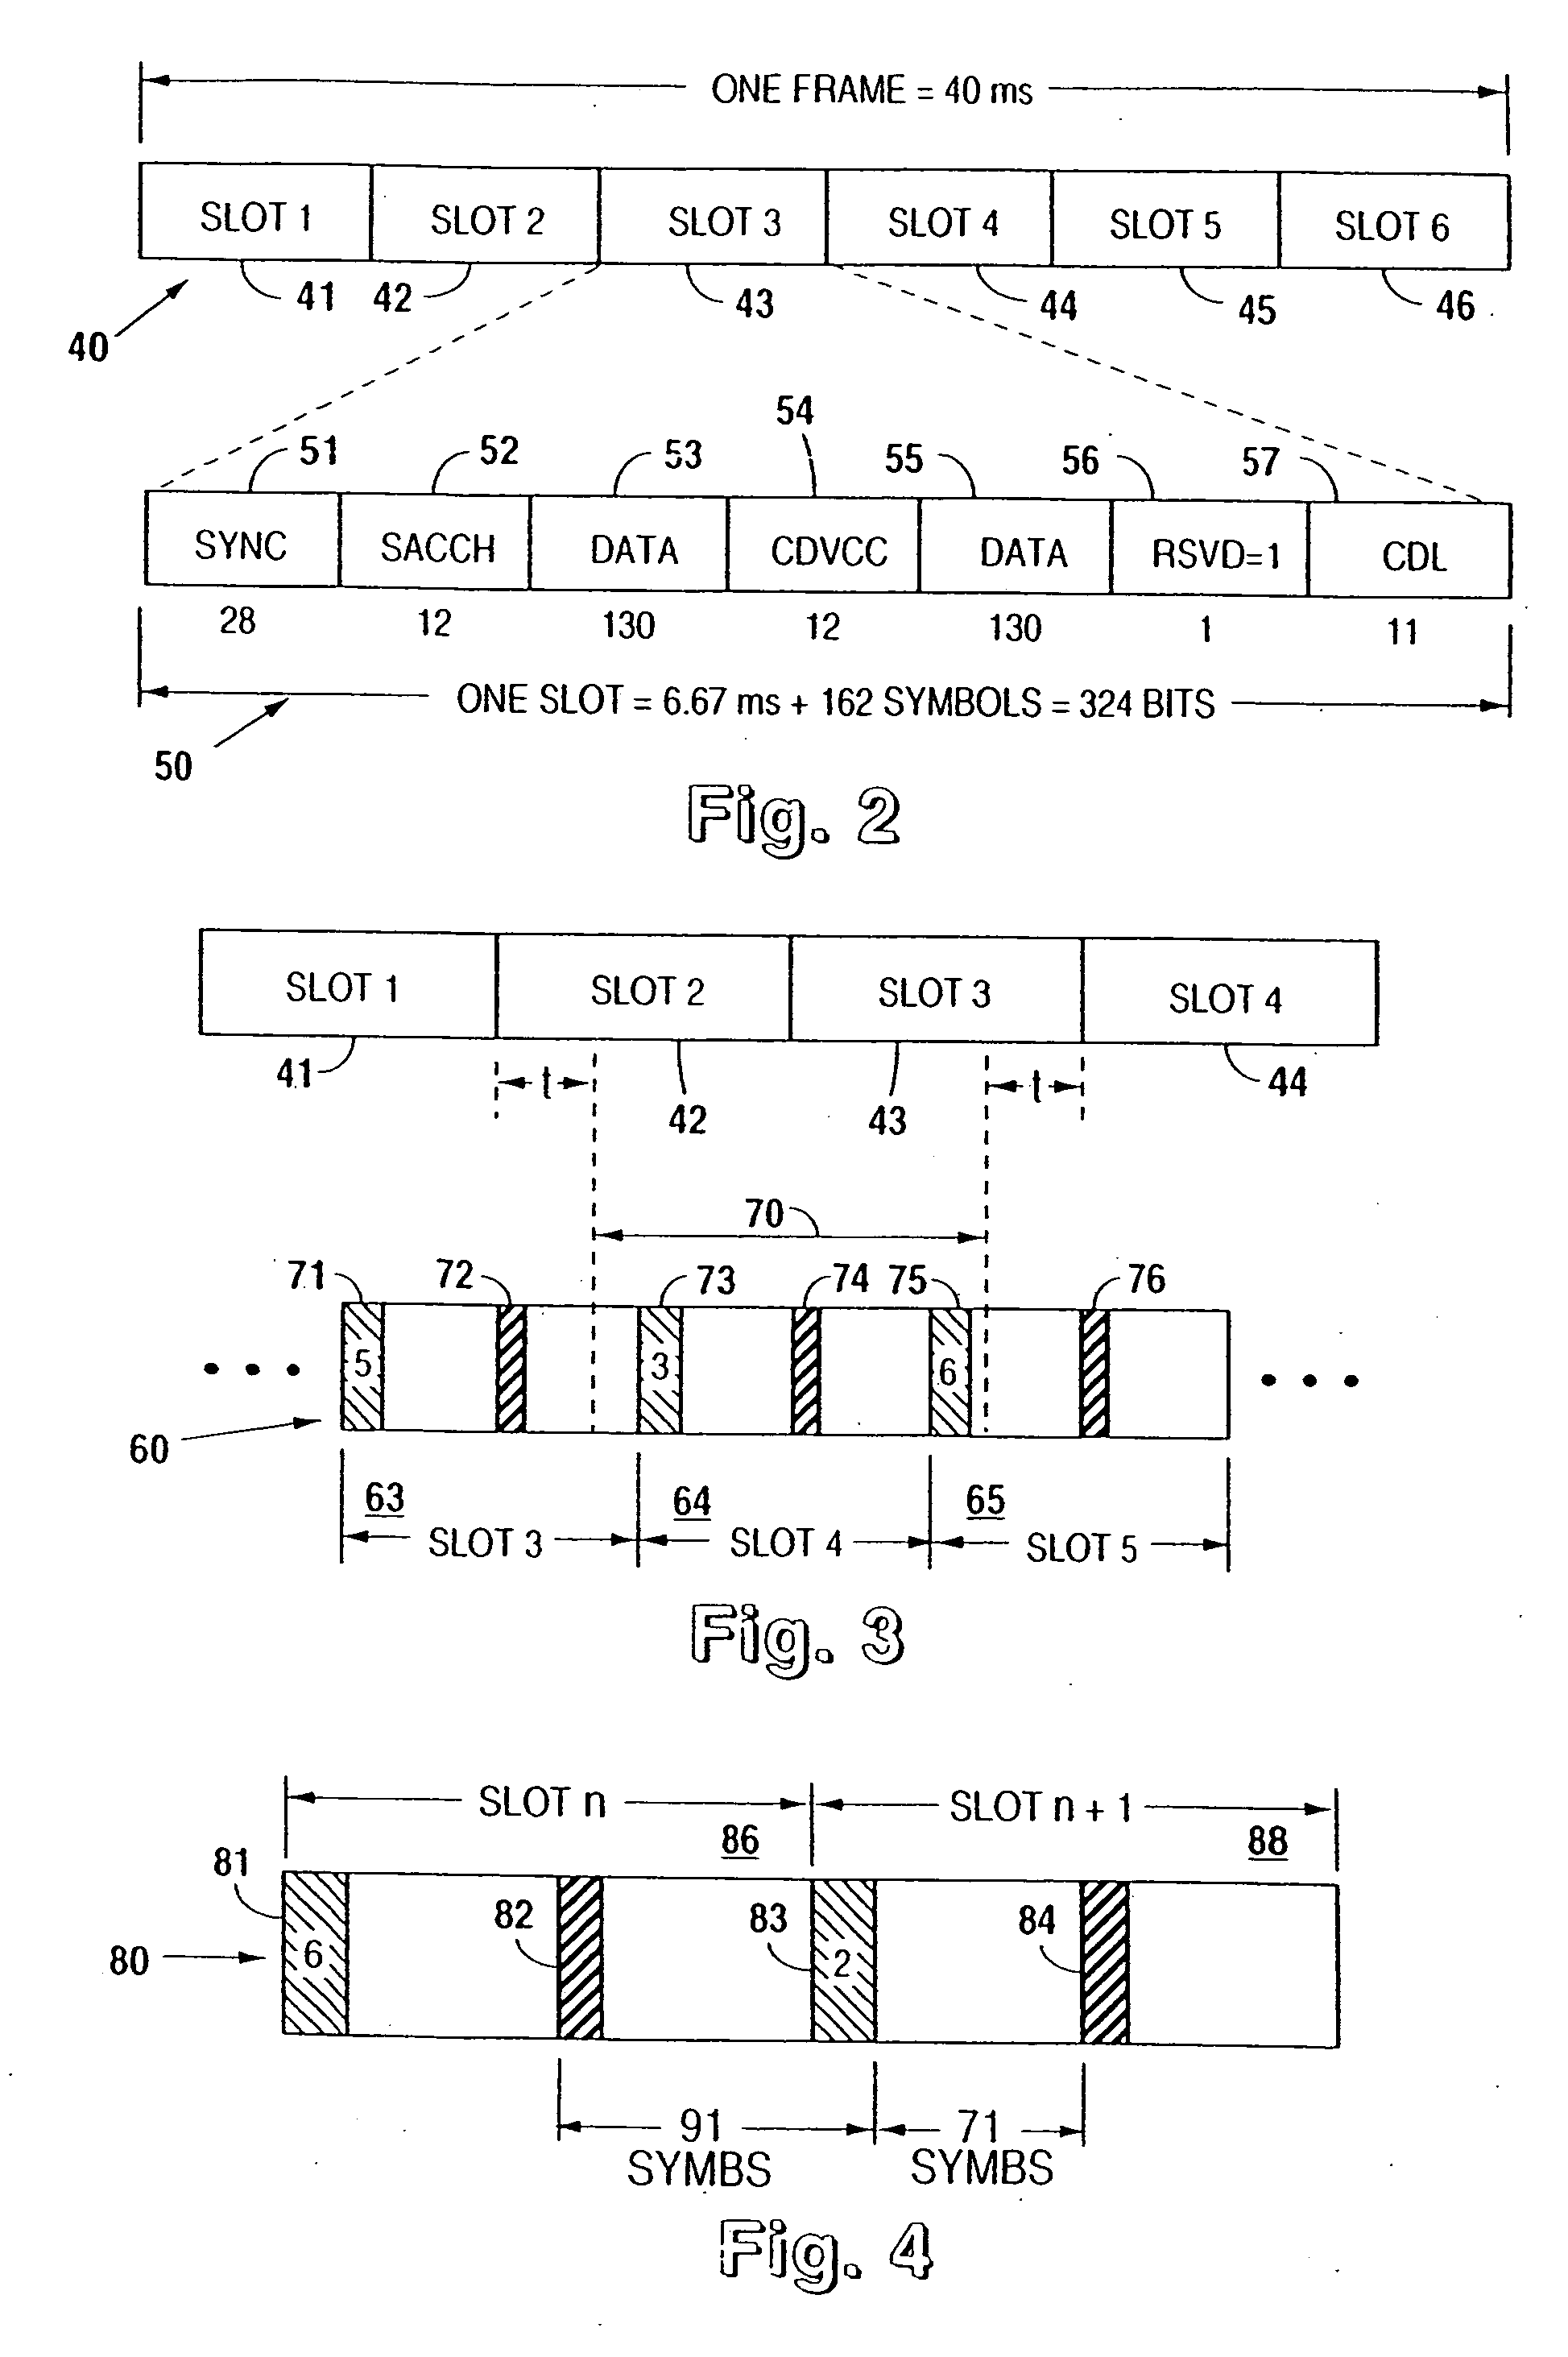 Mobile assisted handoff system and method